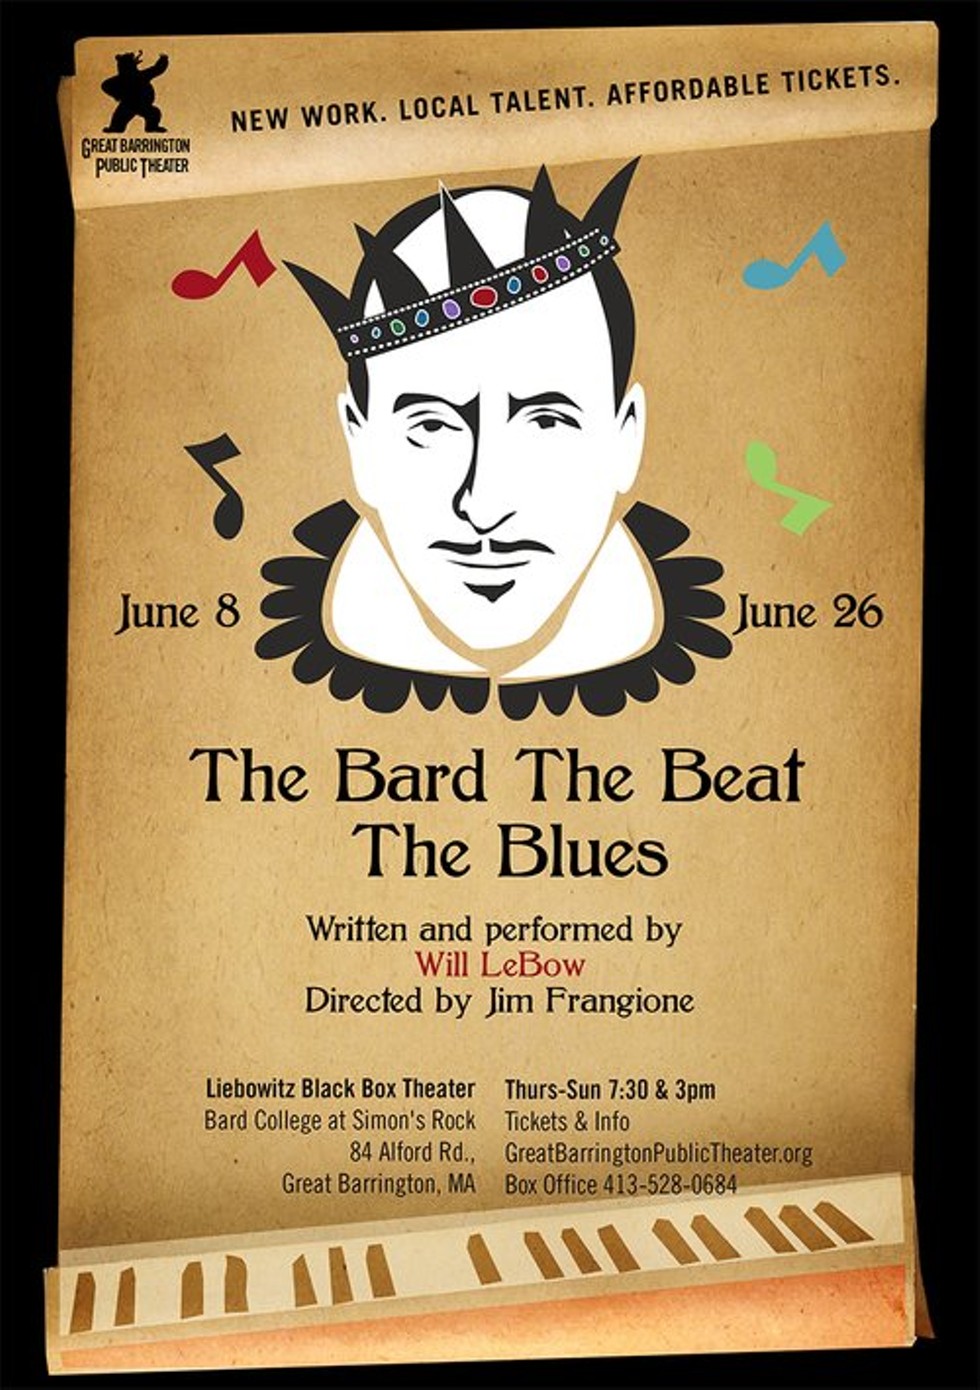 The Bard The Beat The Blues solo show